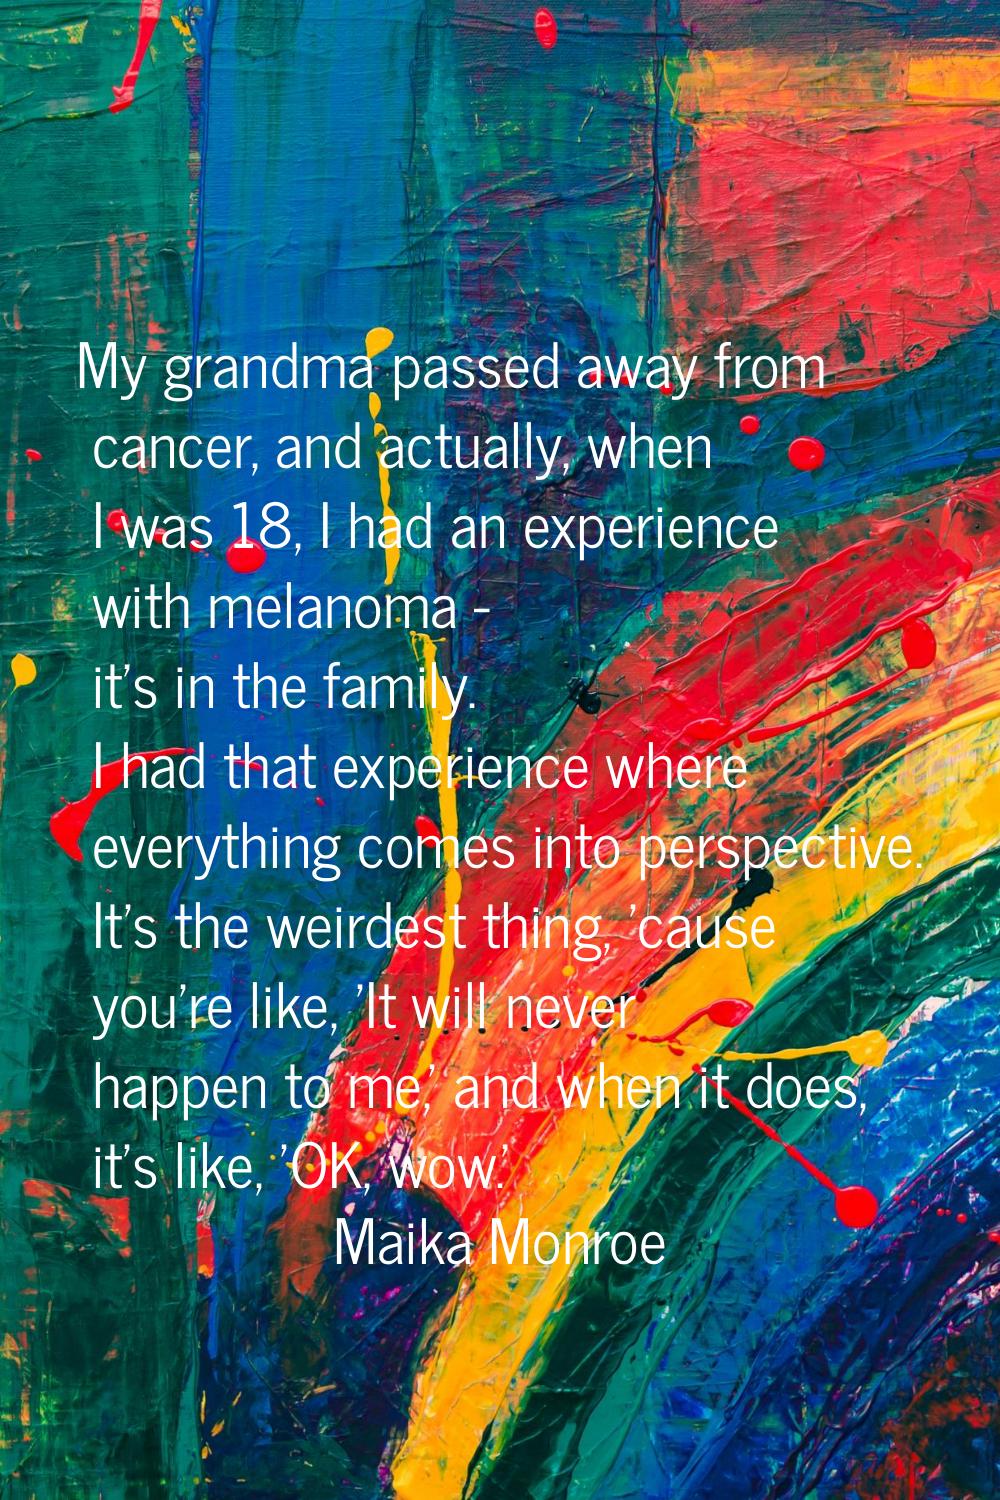 My grandma passed away from cancer, and actually, when I was 18, I had an experience with melanoma 